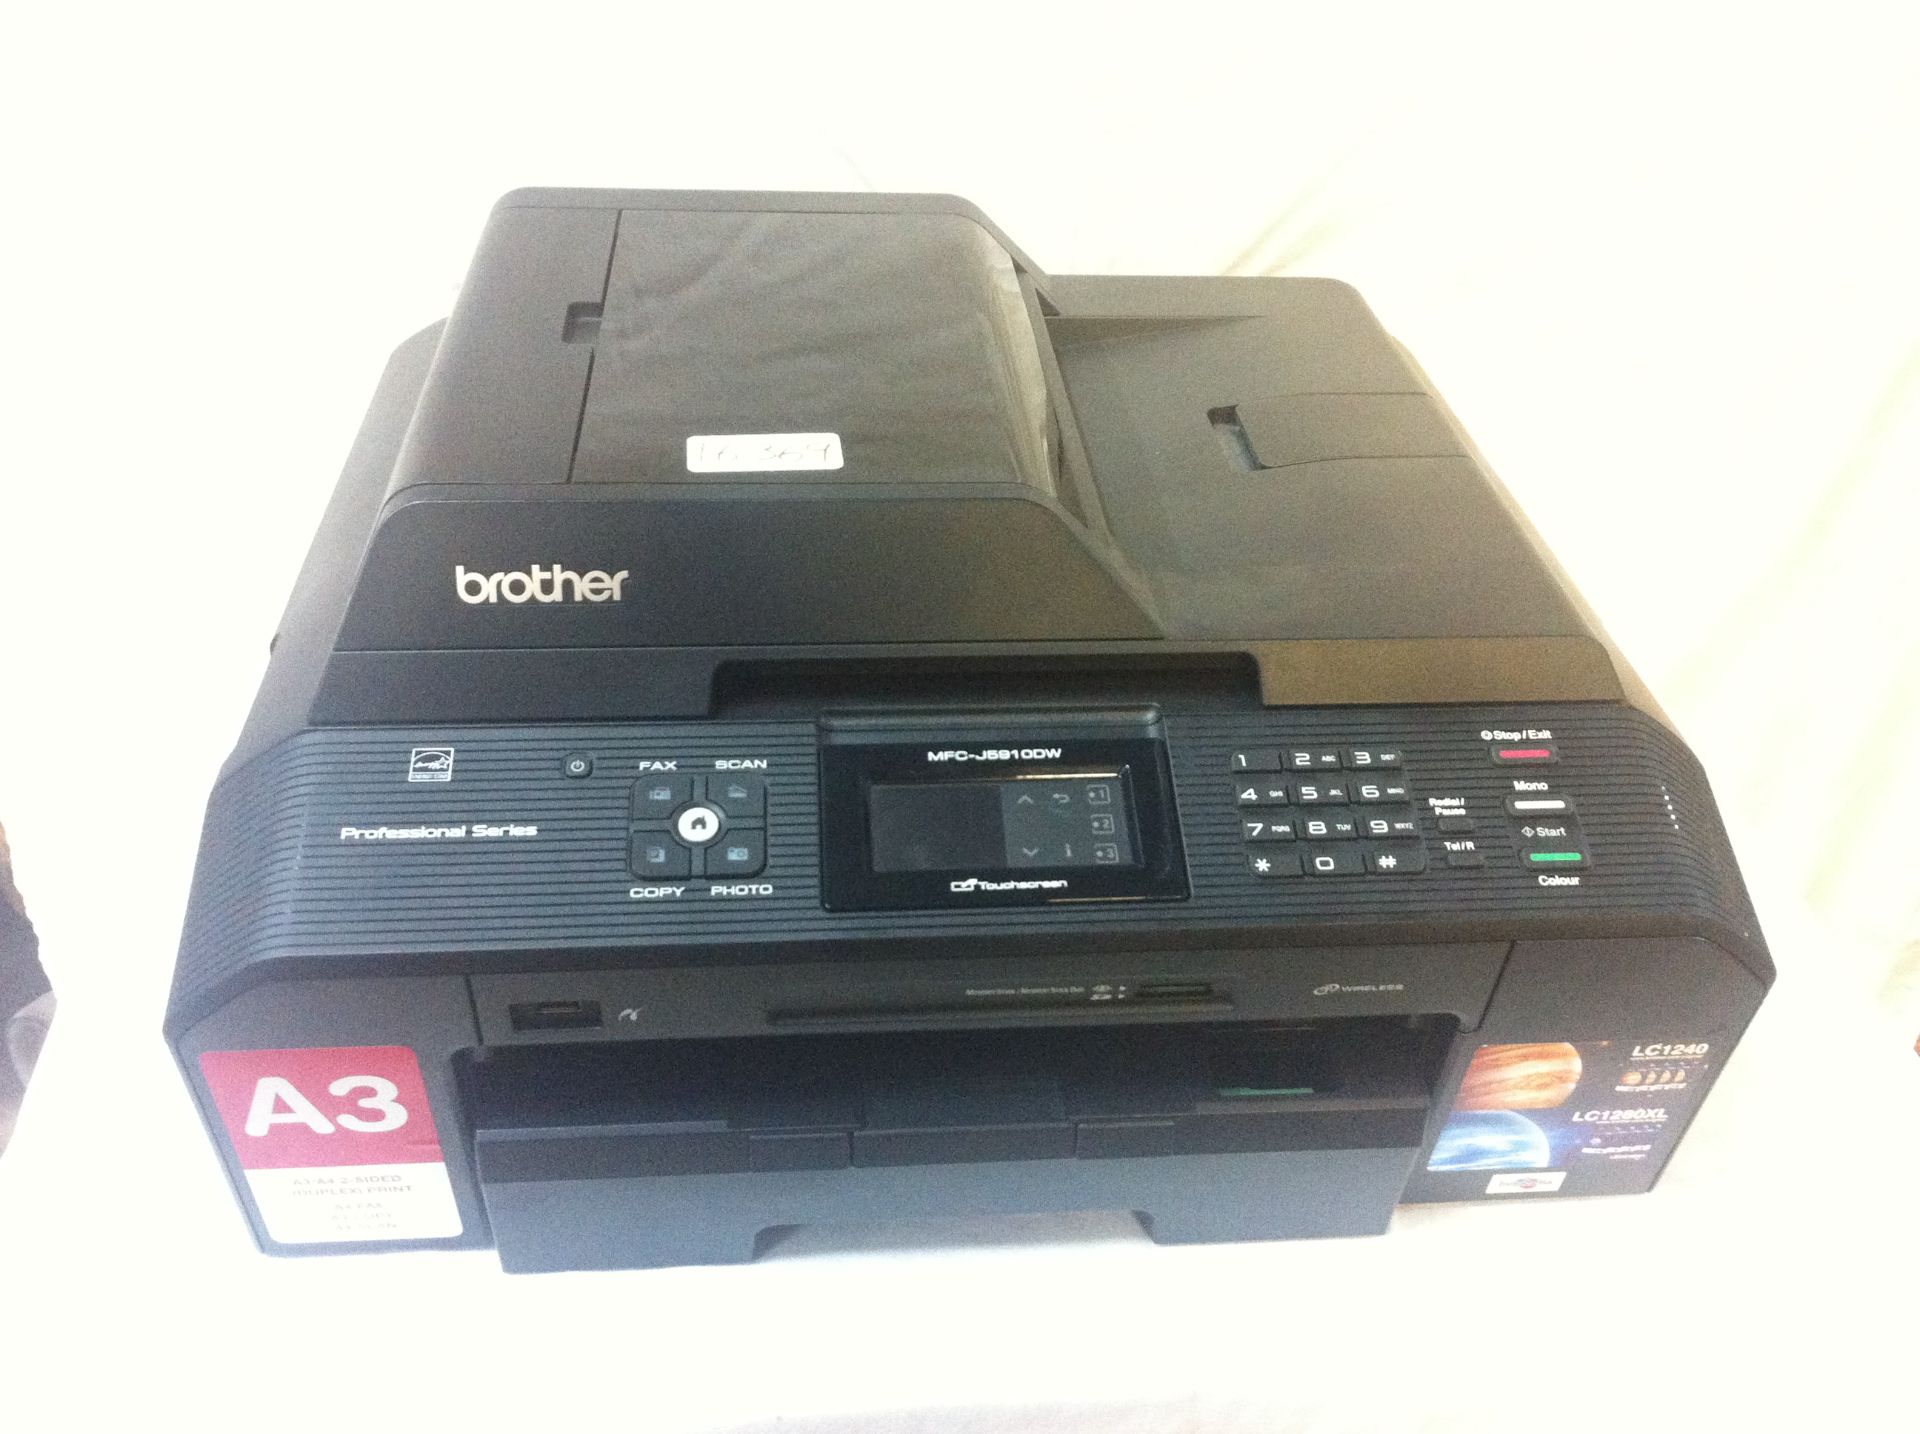 4 Printers - Epson, HP and Brother; as per description